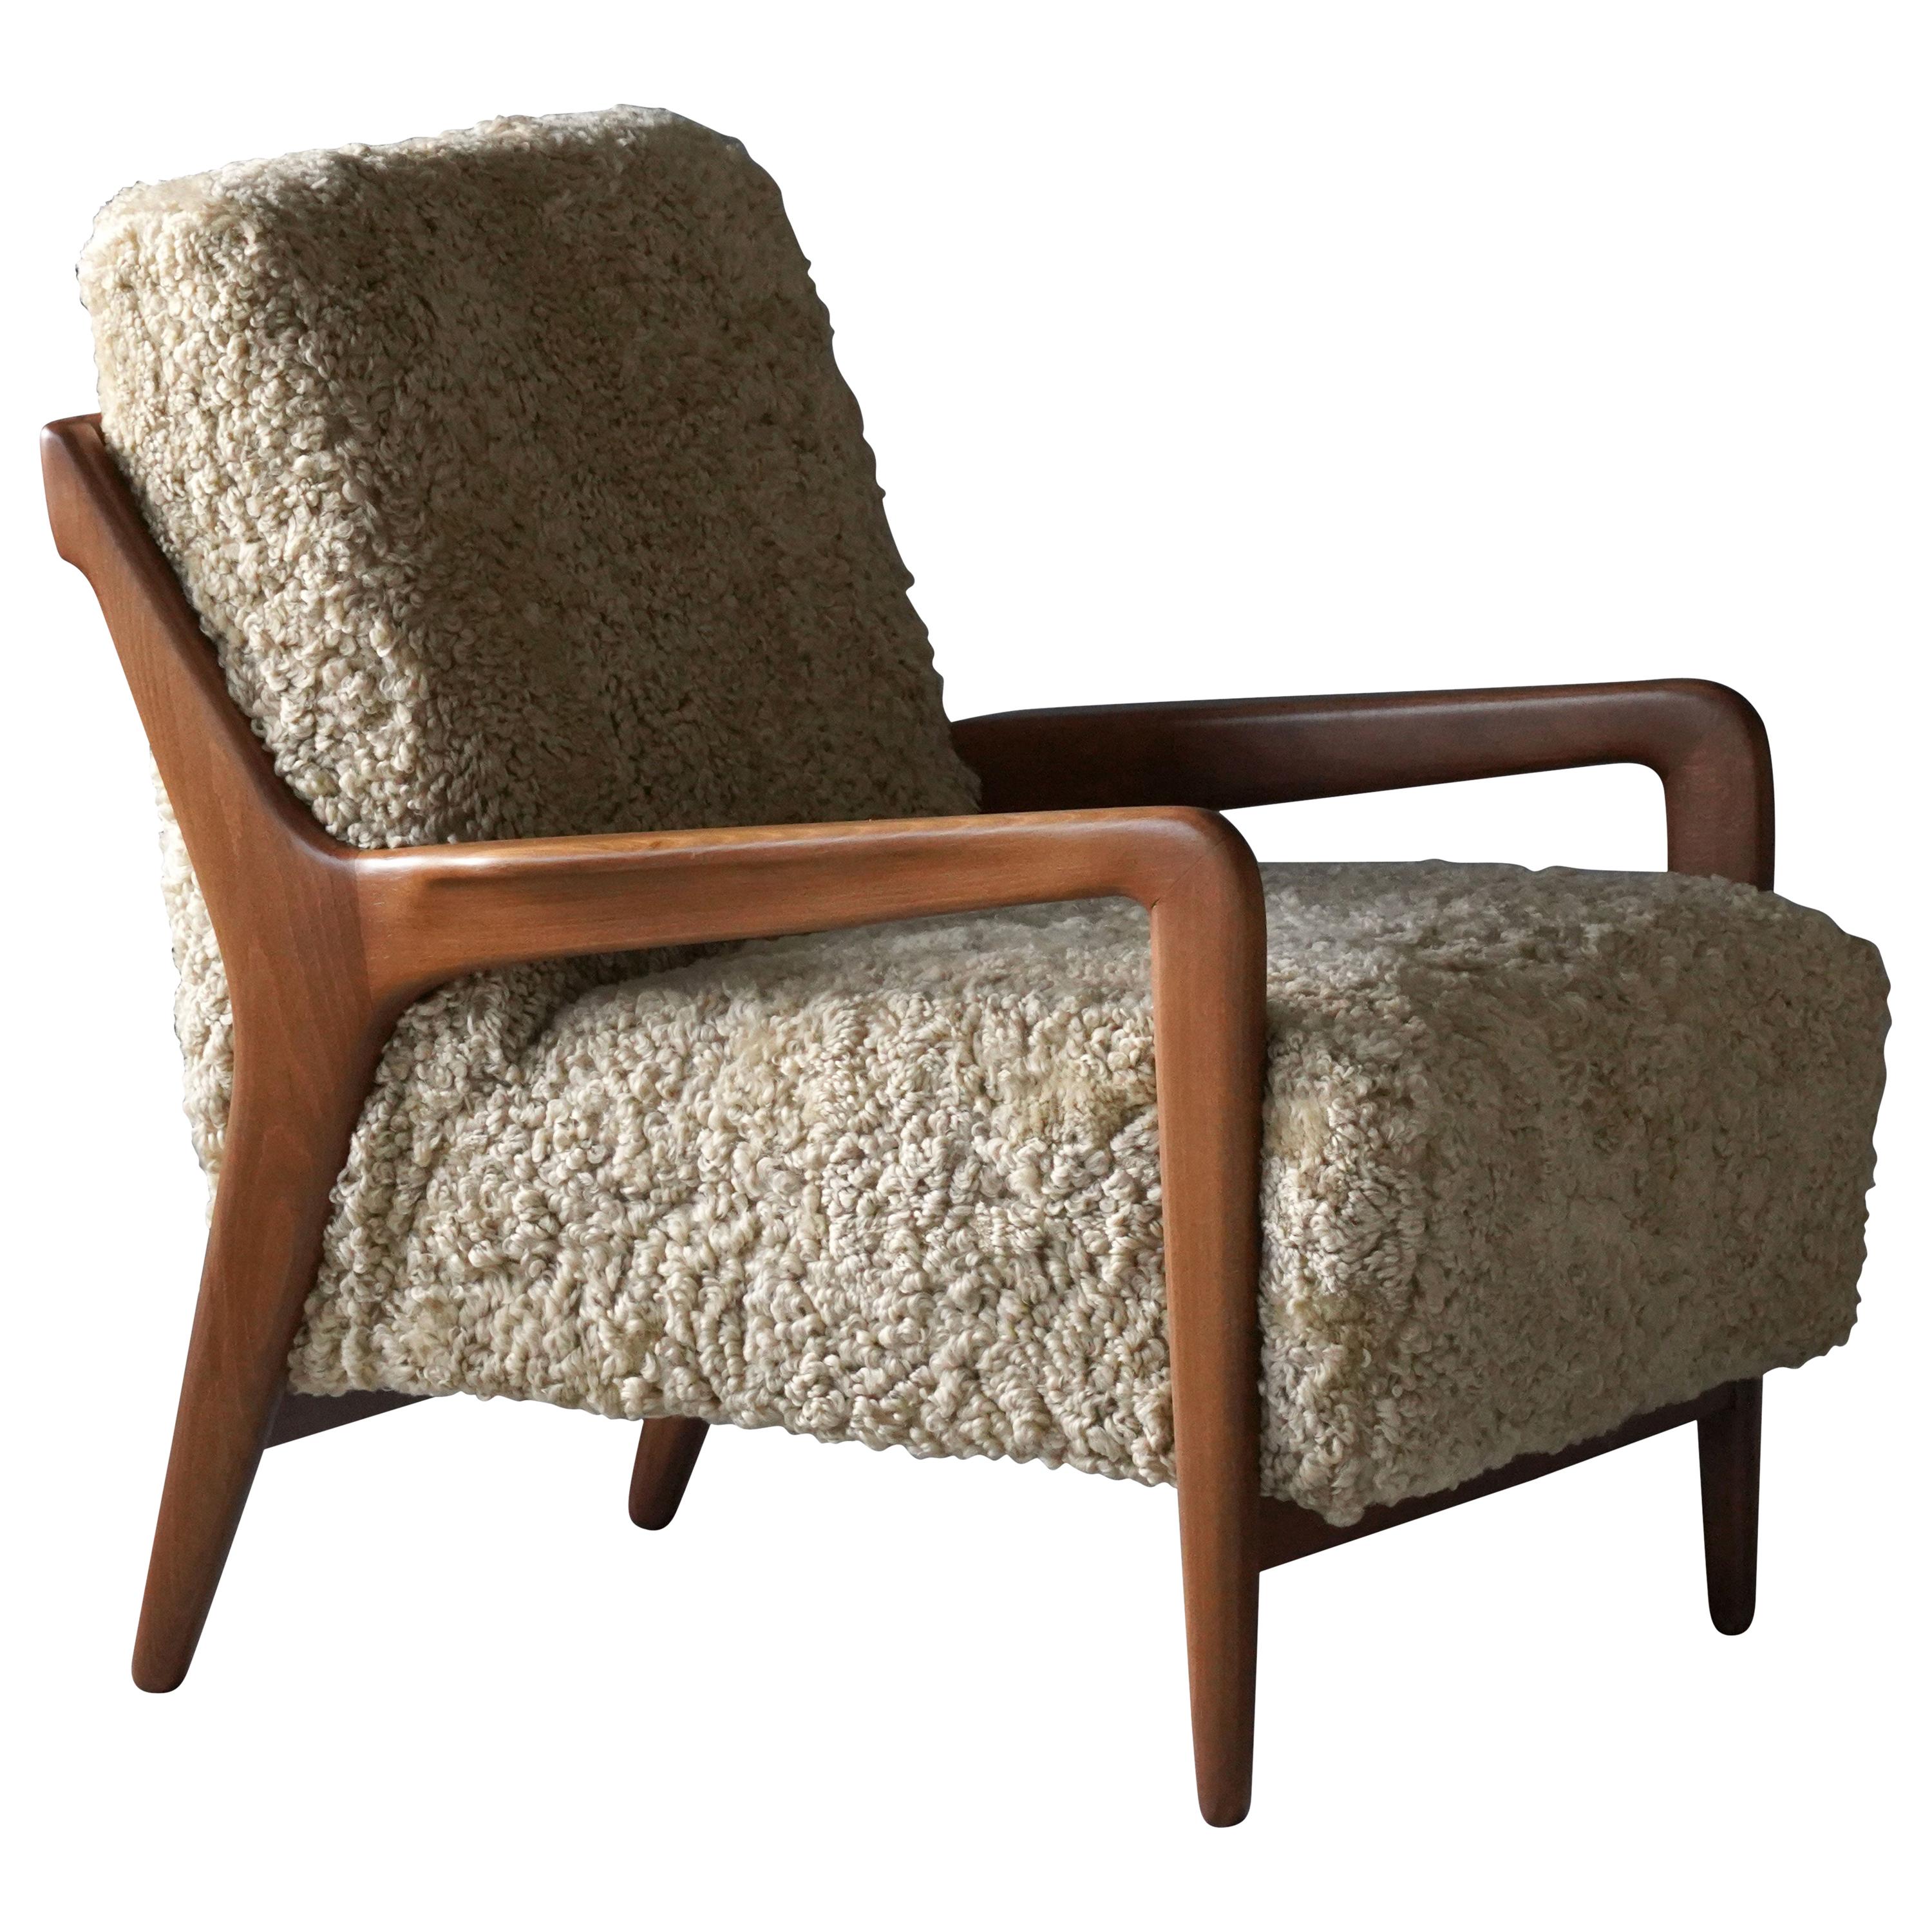 Lucchini & Lissone, Lounge Chair, Stained Beech, Beige Sheepskin, Italy, 1950s